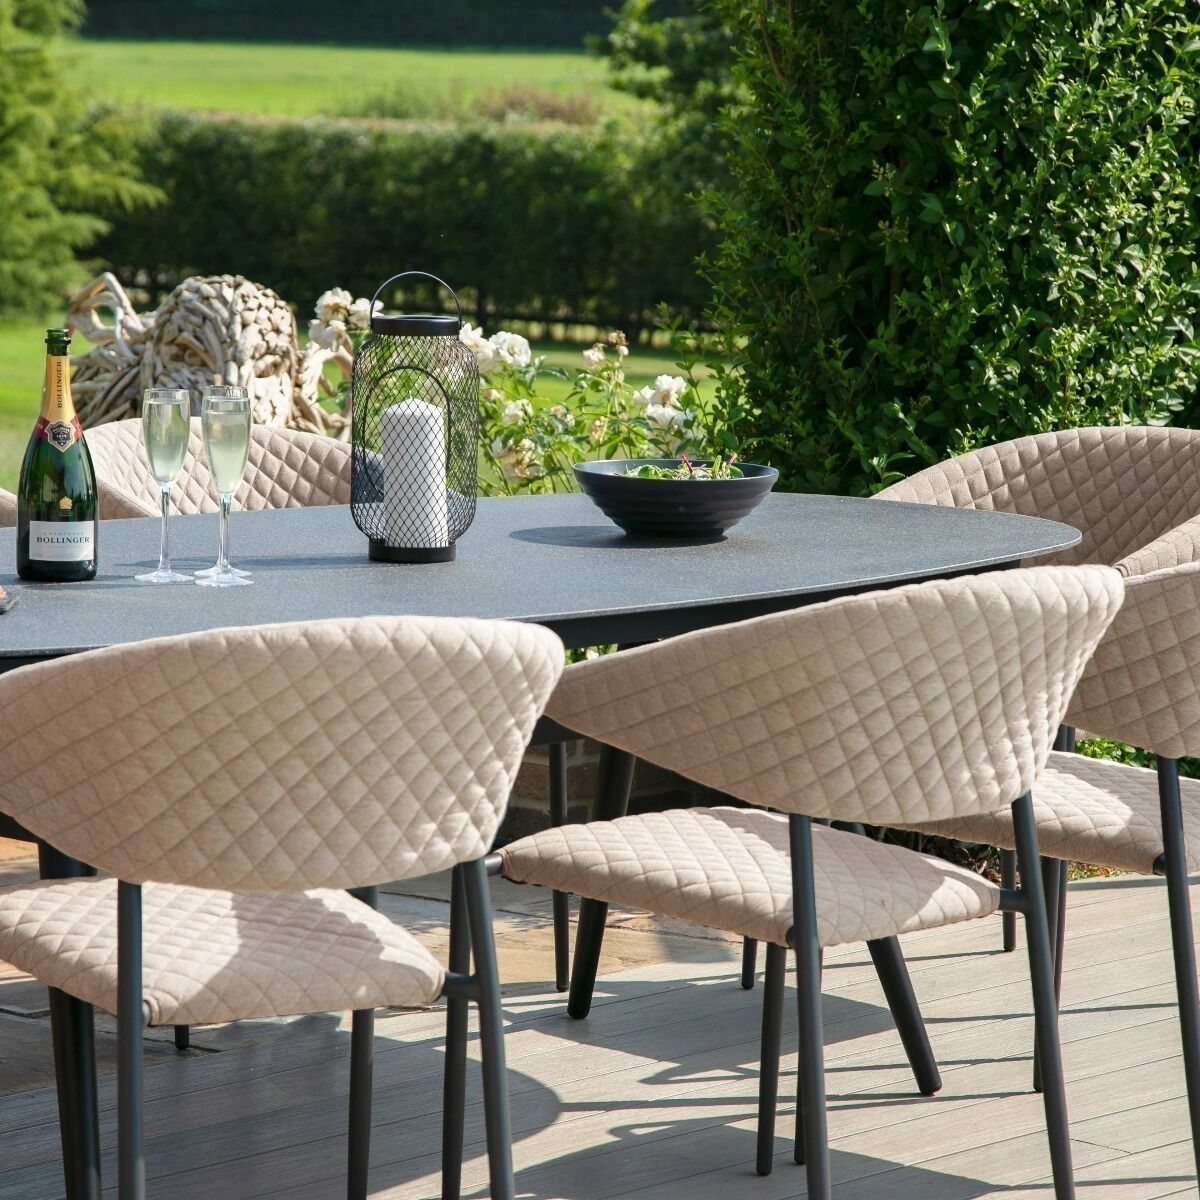 Maze - Outdoor Fabric Pebble 8 Seat Oval Dining Set - Taupe product image